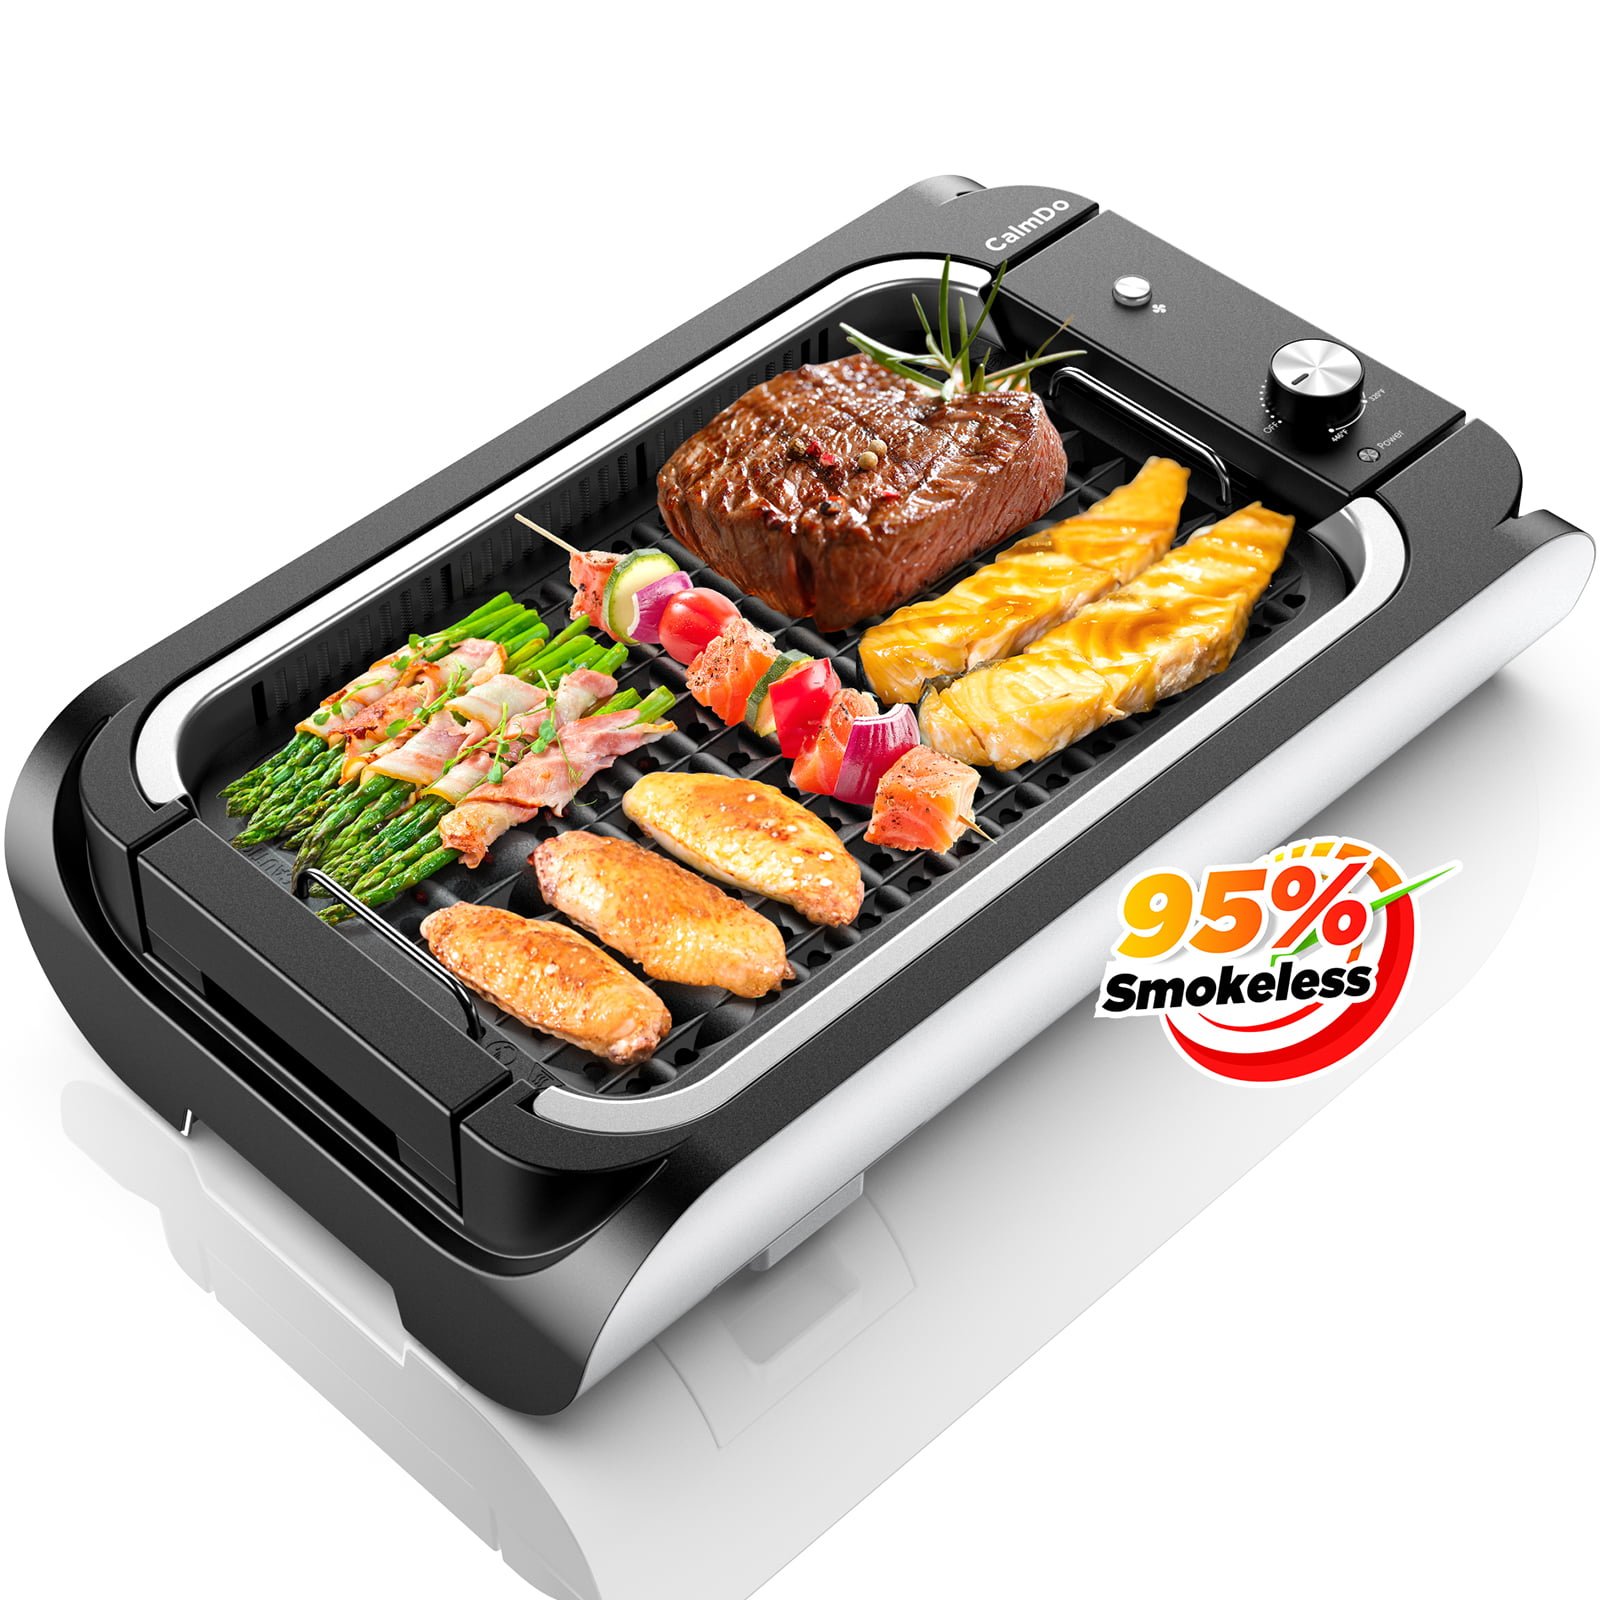 CalmDo Electric Grill, Smokeless Indoor Grill with Tempered Glass